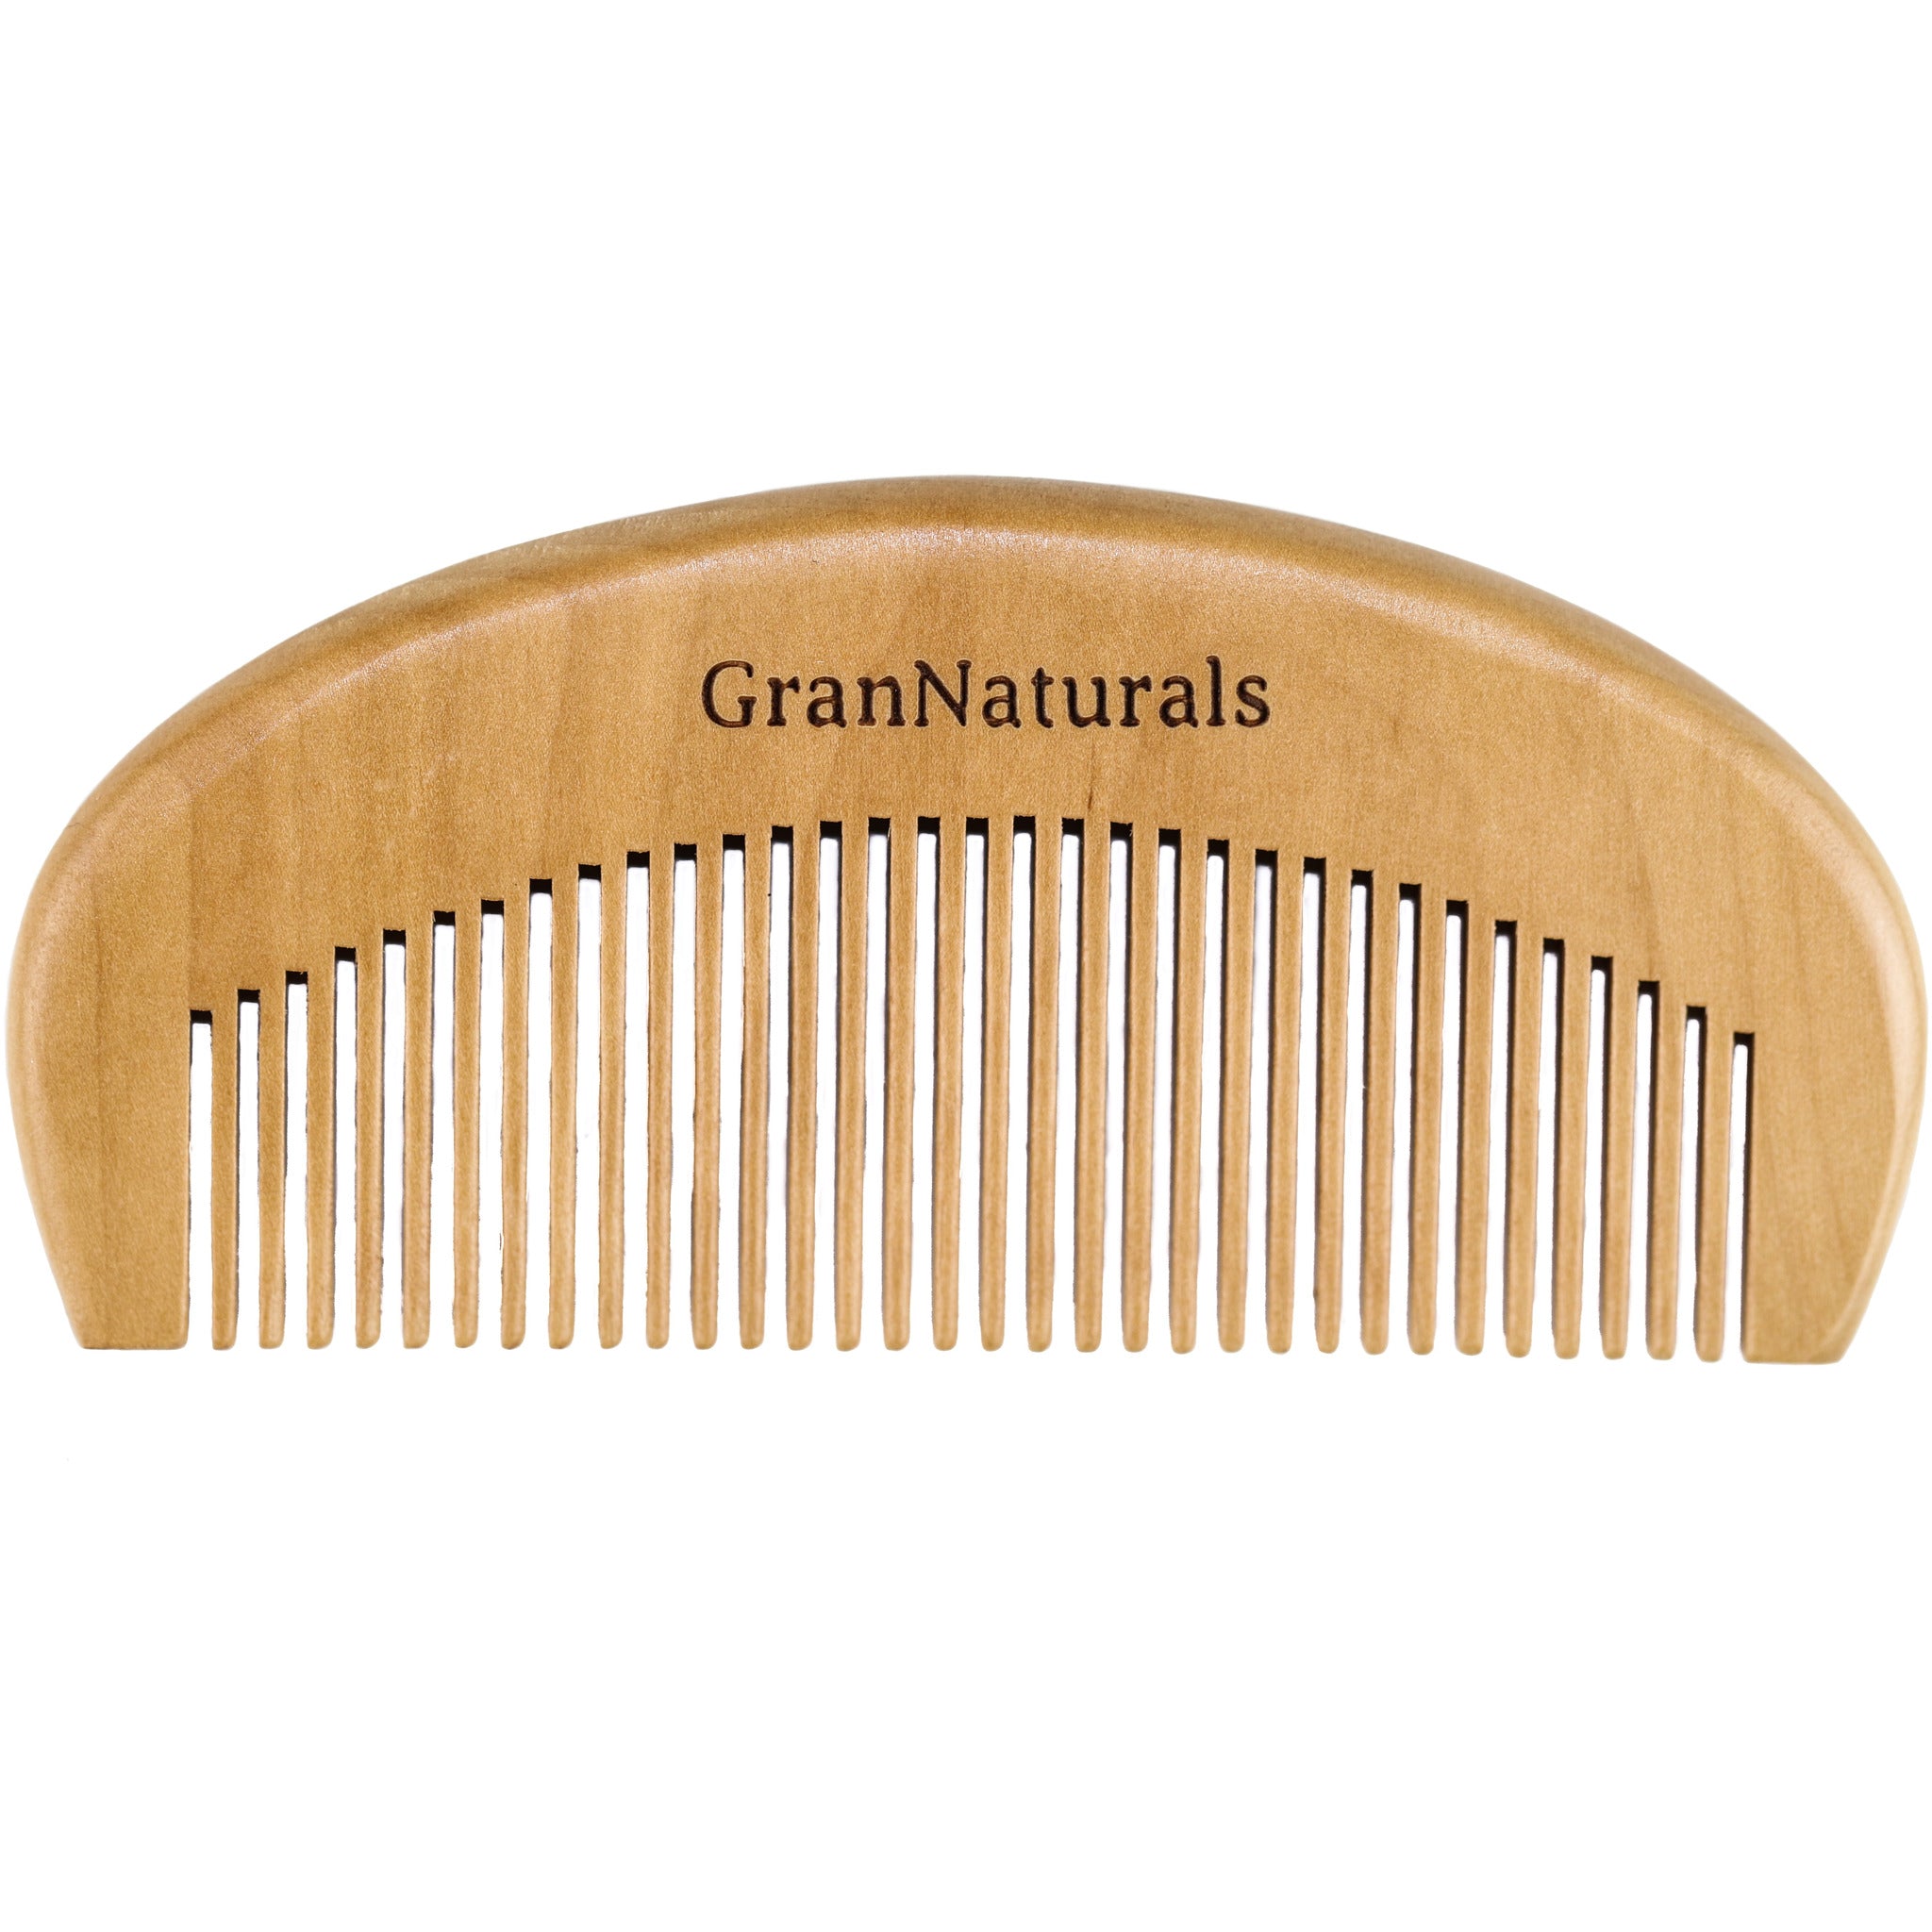 GranNaturals Wooden Comb Hair + Beard Detangler for Women and Men - Natural Anti Static Wood for Detangling and Styling Wet or Dry Curly, Thick, Wavy, or Straight Hair - Small Pocket Sized